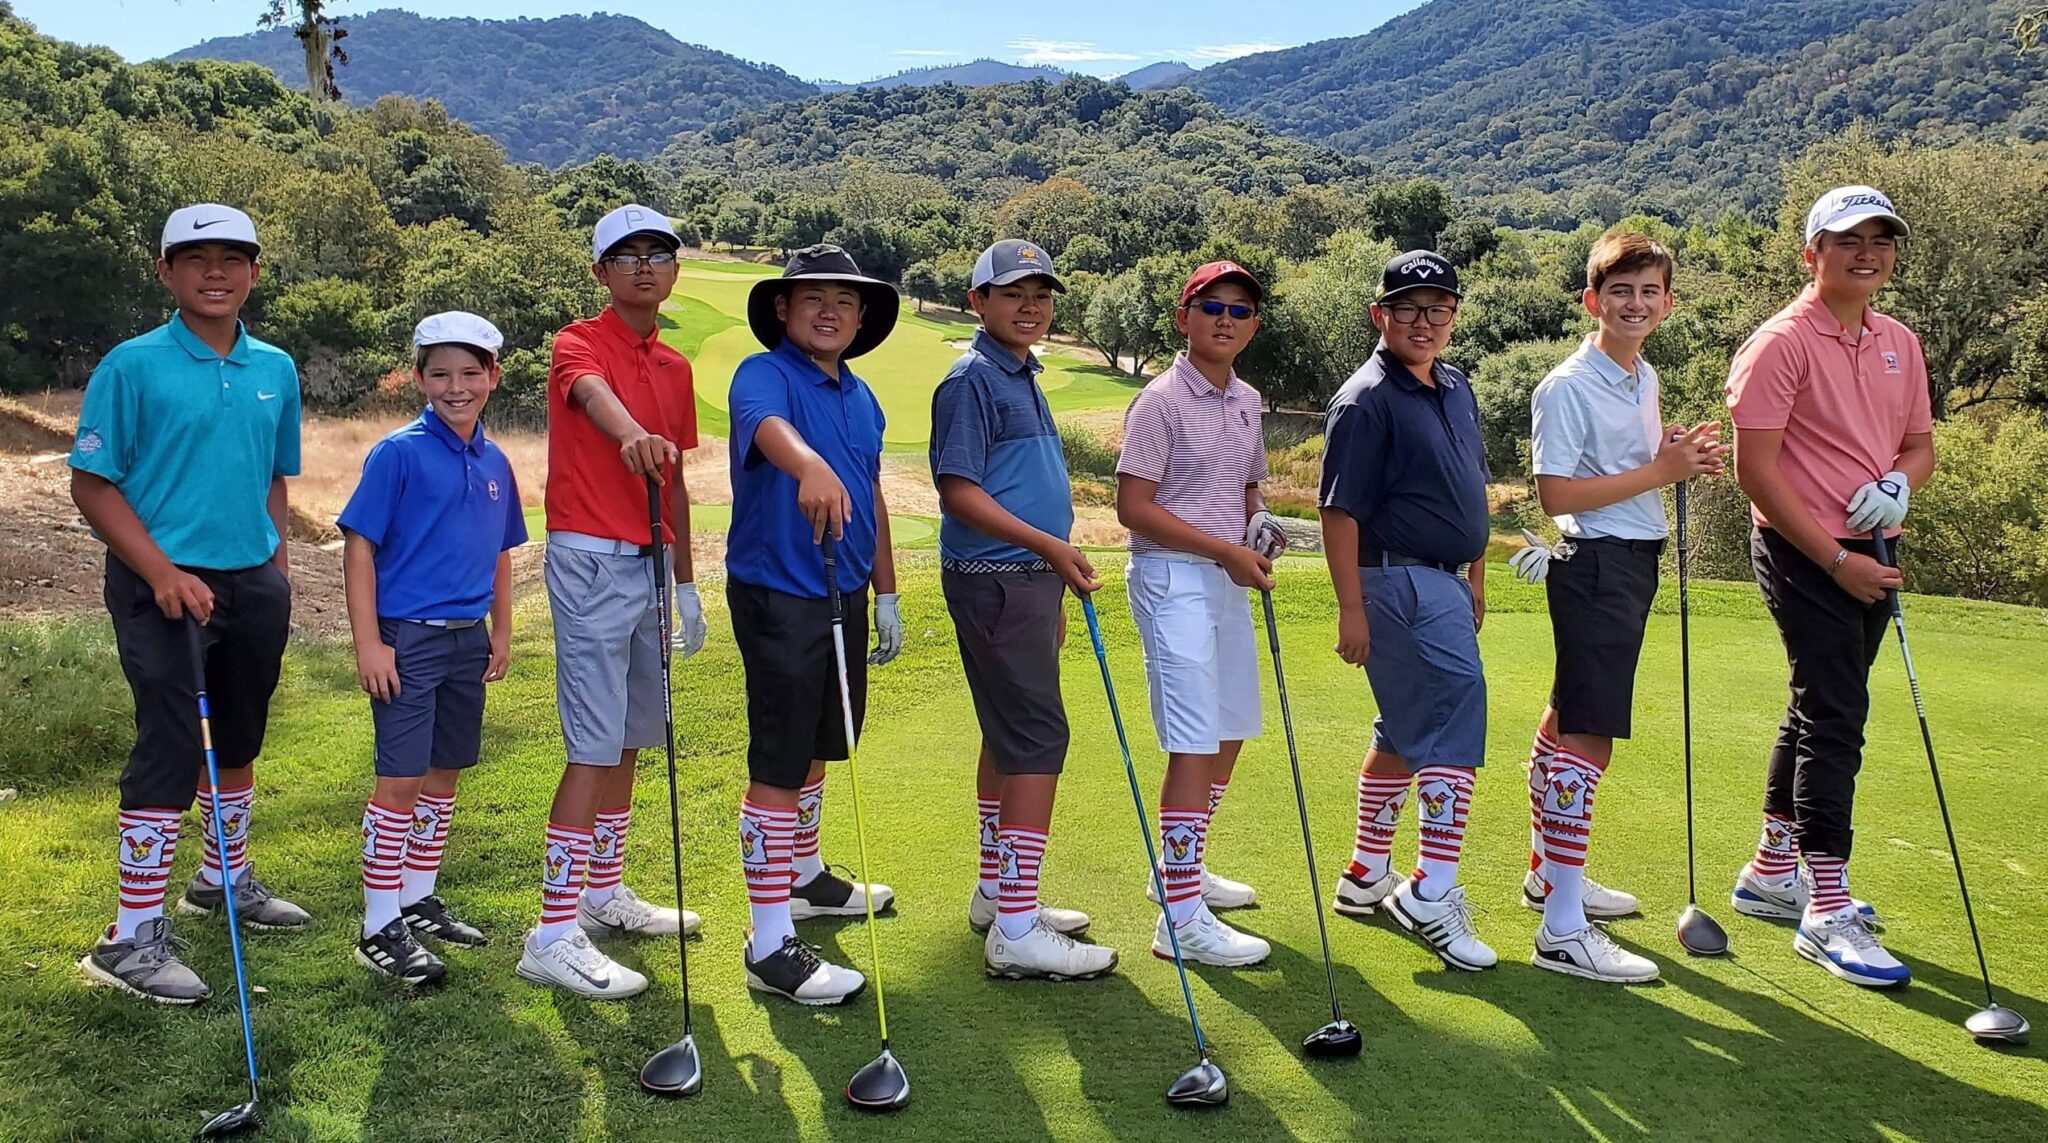 A group of teenage boys with golf clubs.